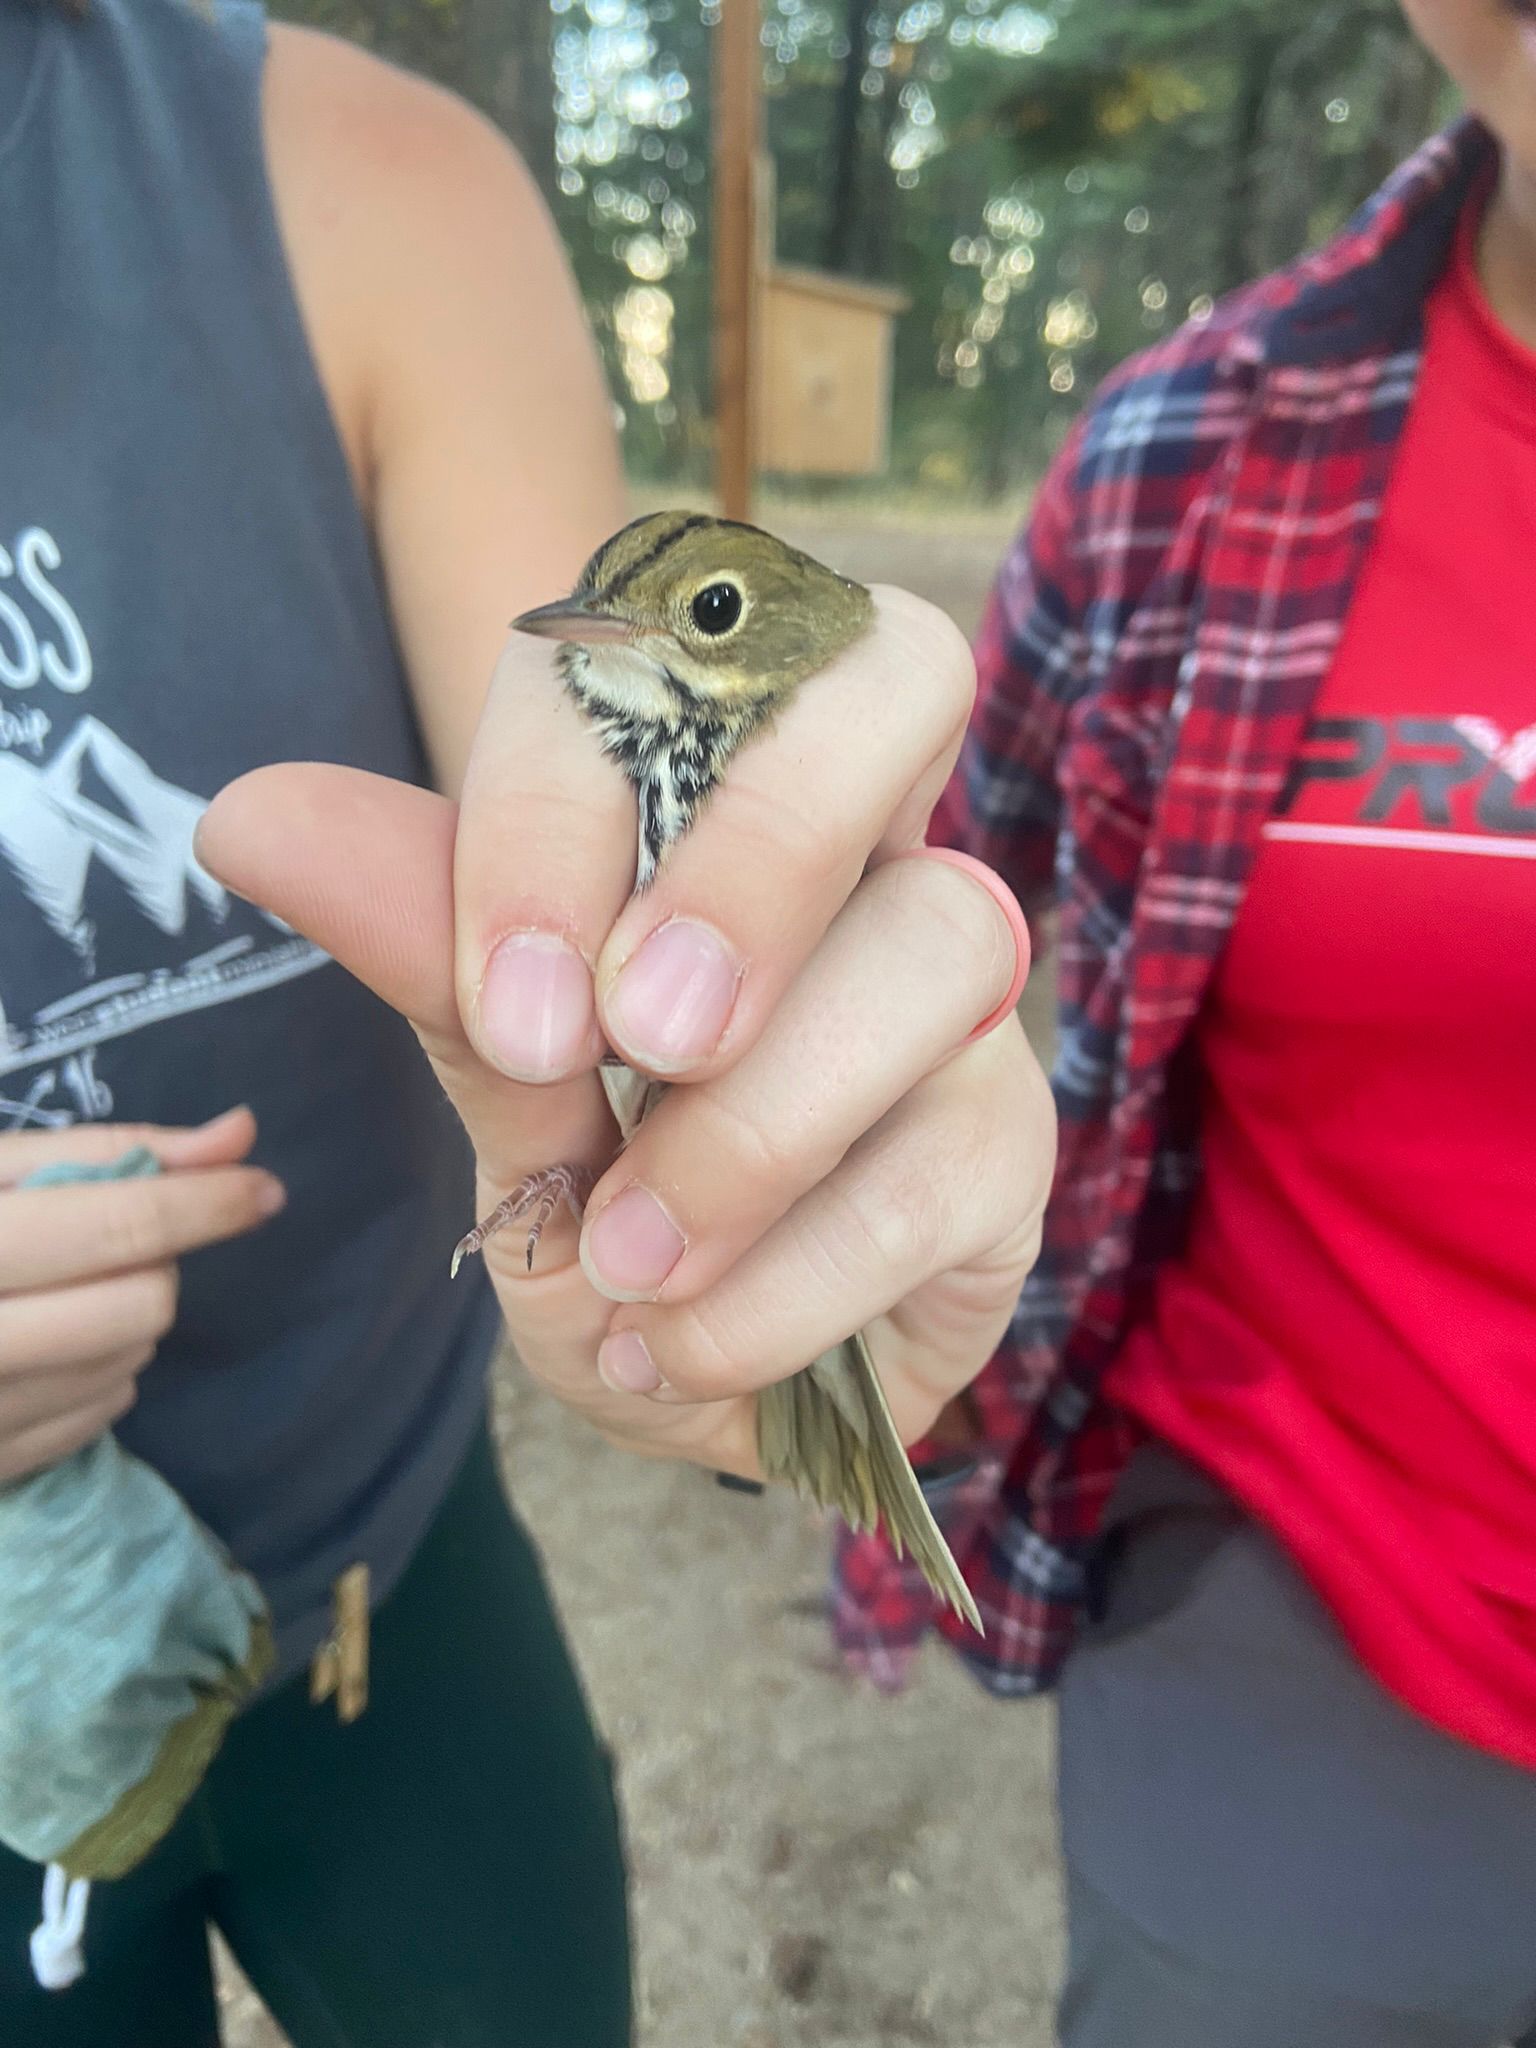 biologist holding a small brown songbird gently in the hand